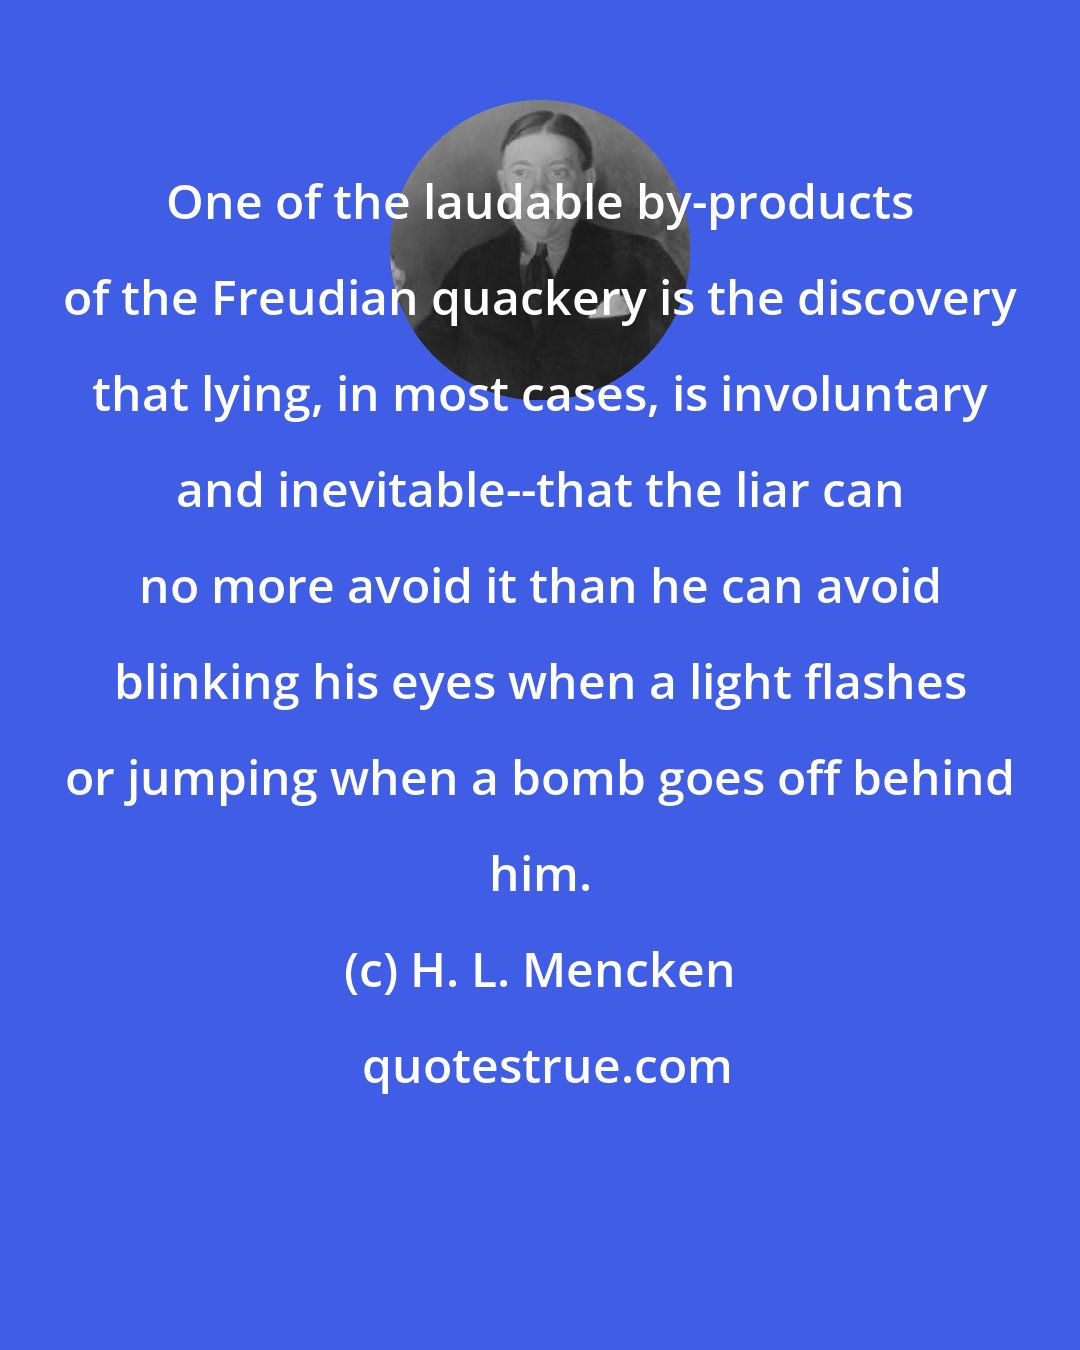 H. L. Mencken: One of the laudable by-products of the Freudian quackery is the discovery that lying, in most cases, is involuntary and inevitable--that the liar can no more avoid it than he can avoid blinking his eyes when a light flashes or jumping when a bomb goes off behind him.